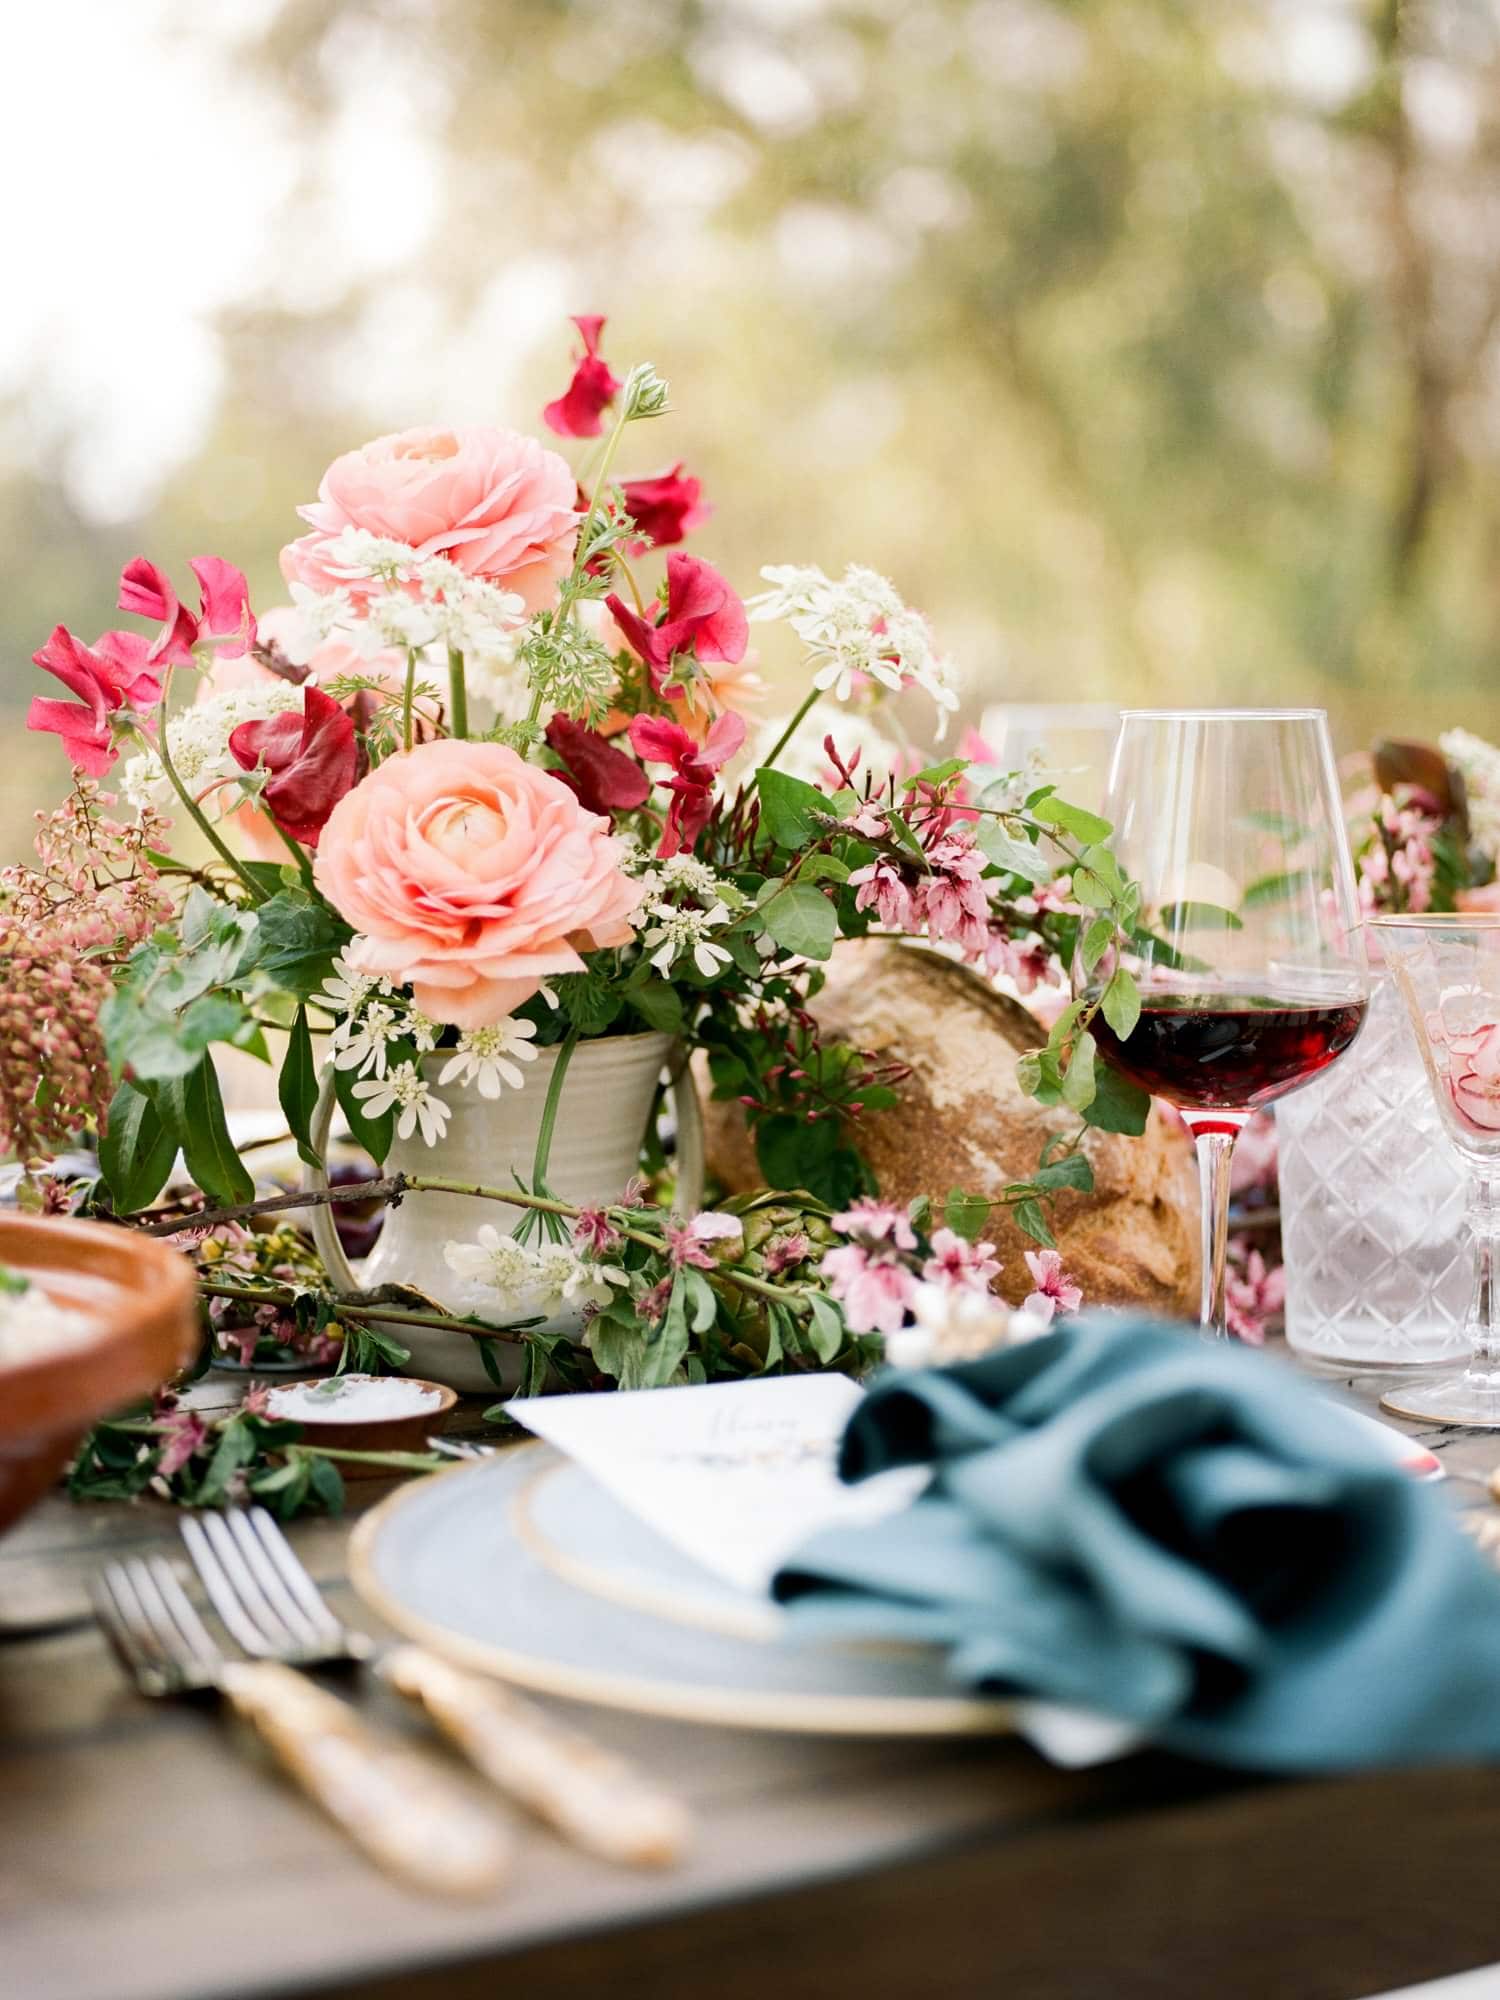 Engagement dinner party inspiration